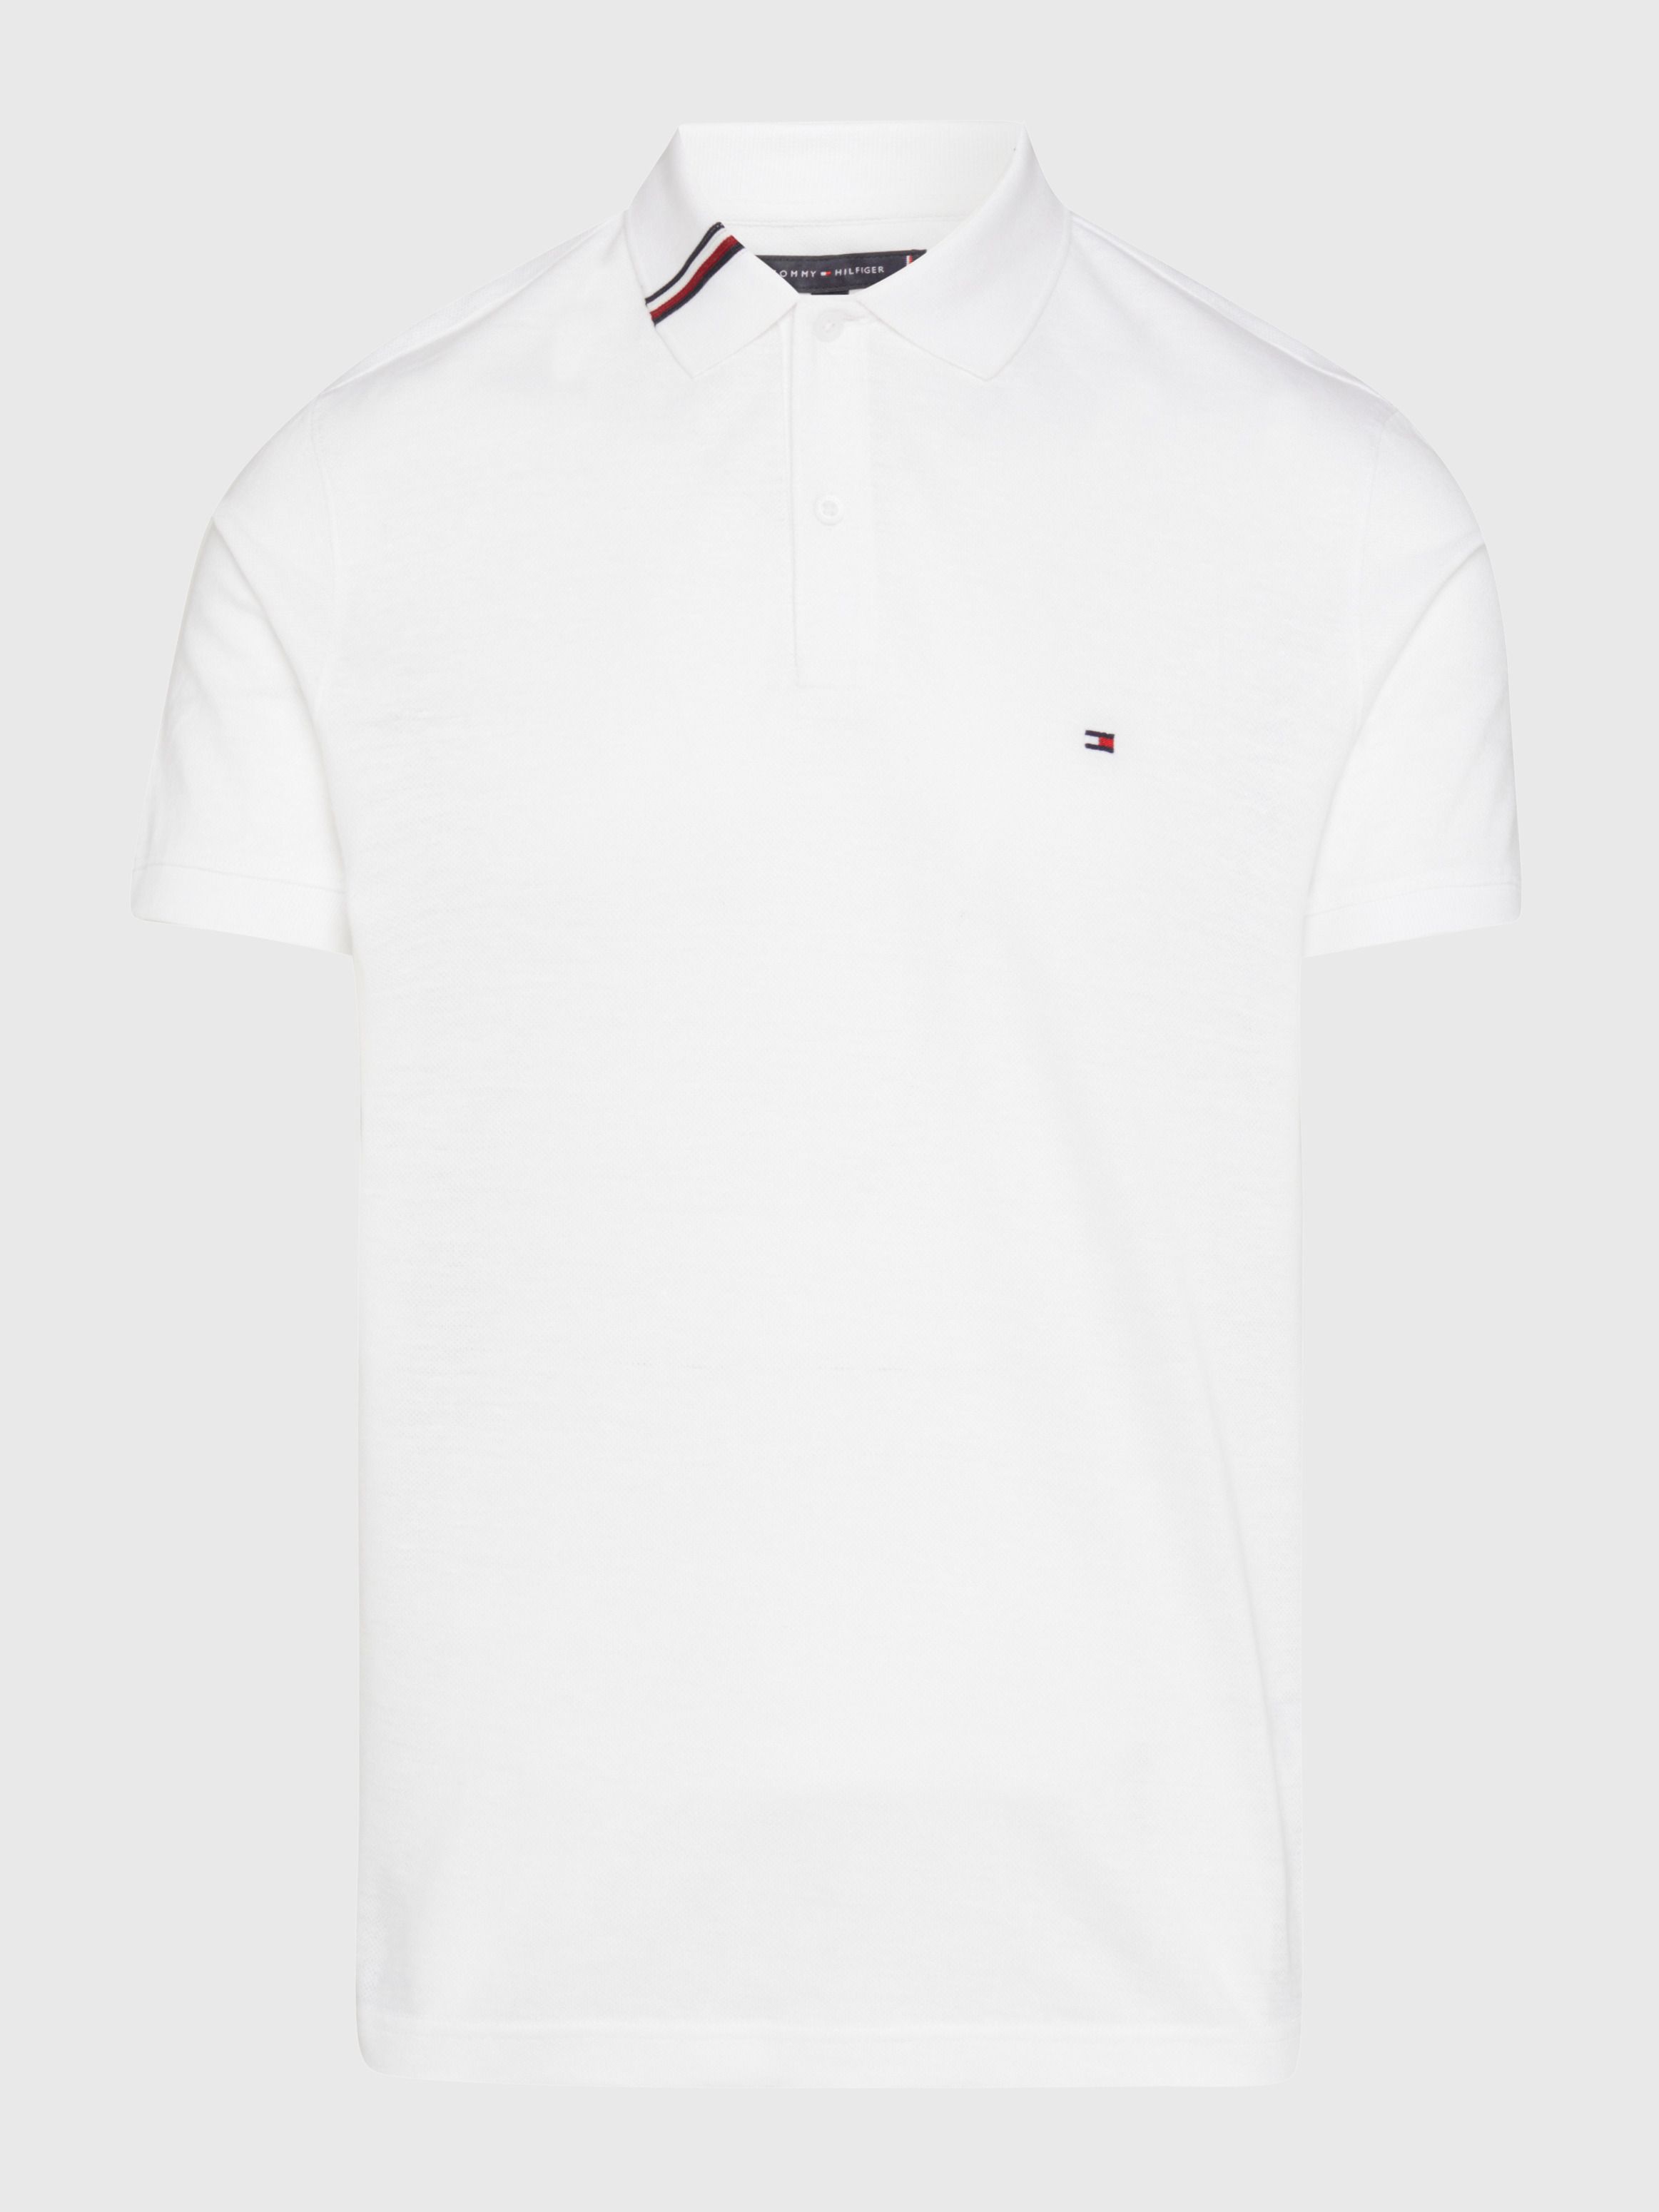 Signature Collar Regular Fit Polo | Tommy Hilfiger